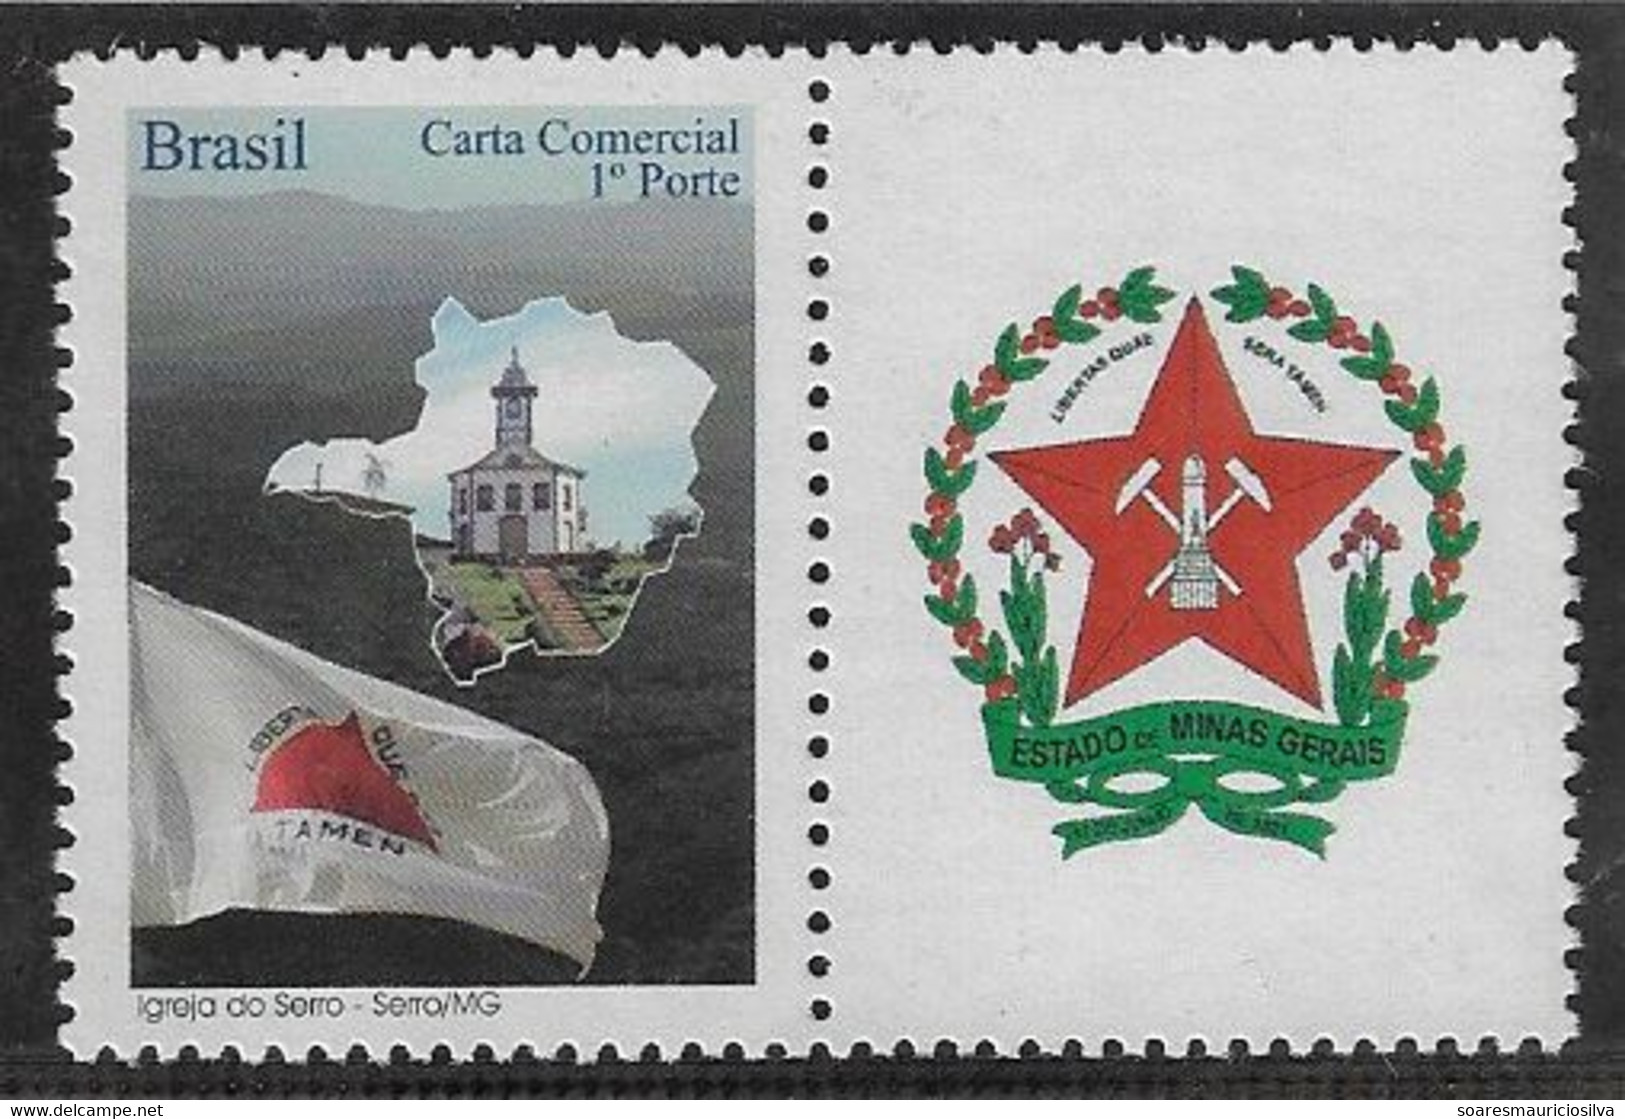 Brazil RHM-C-2856 Personalized Stamp Issued 2009 Church In Serro Map Flag Minas Gerais state Coat Of Arms Coffee Mining - Gepersonaliseerde Postzegels